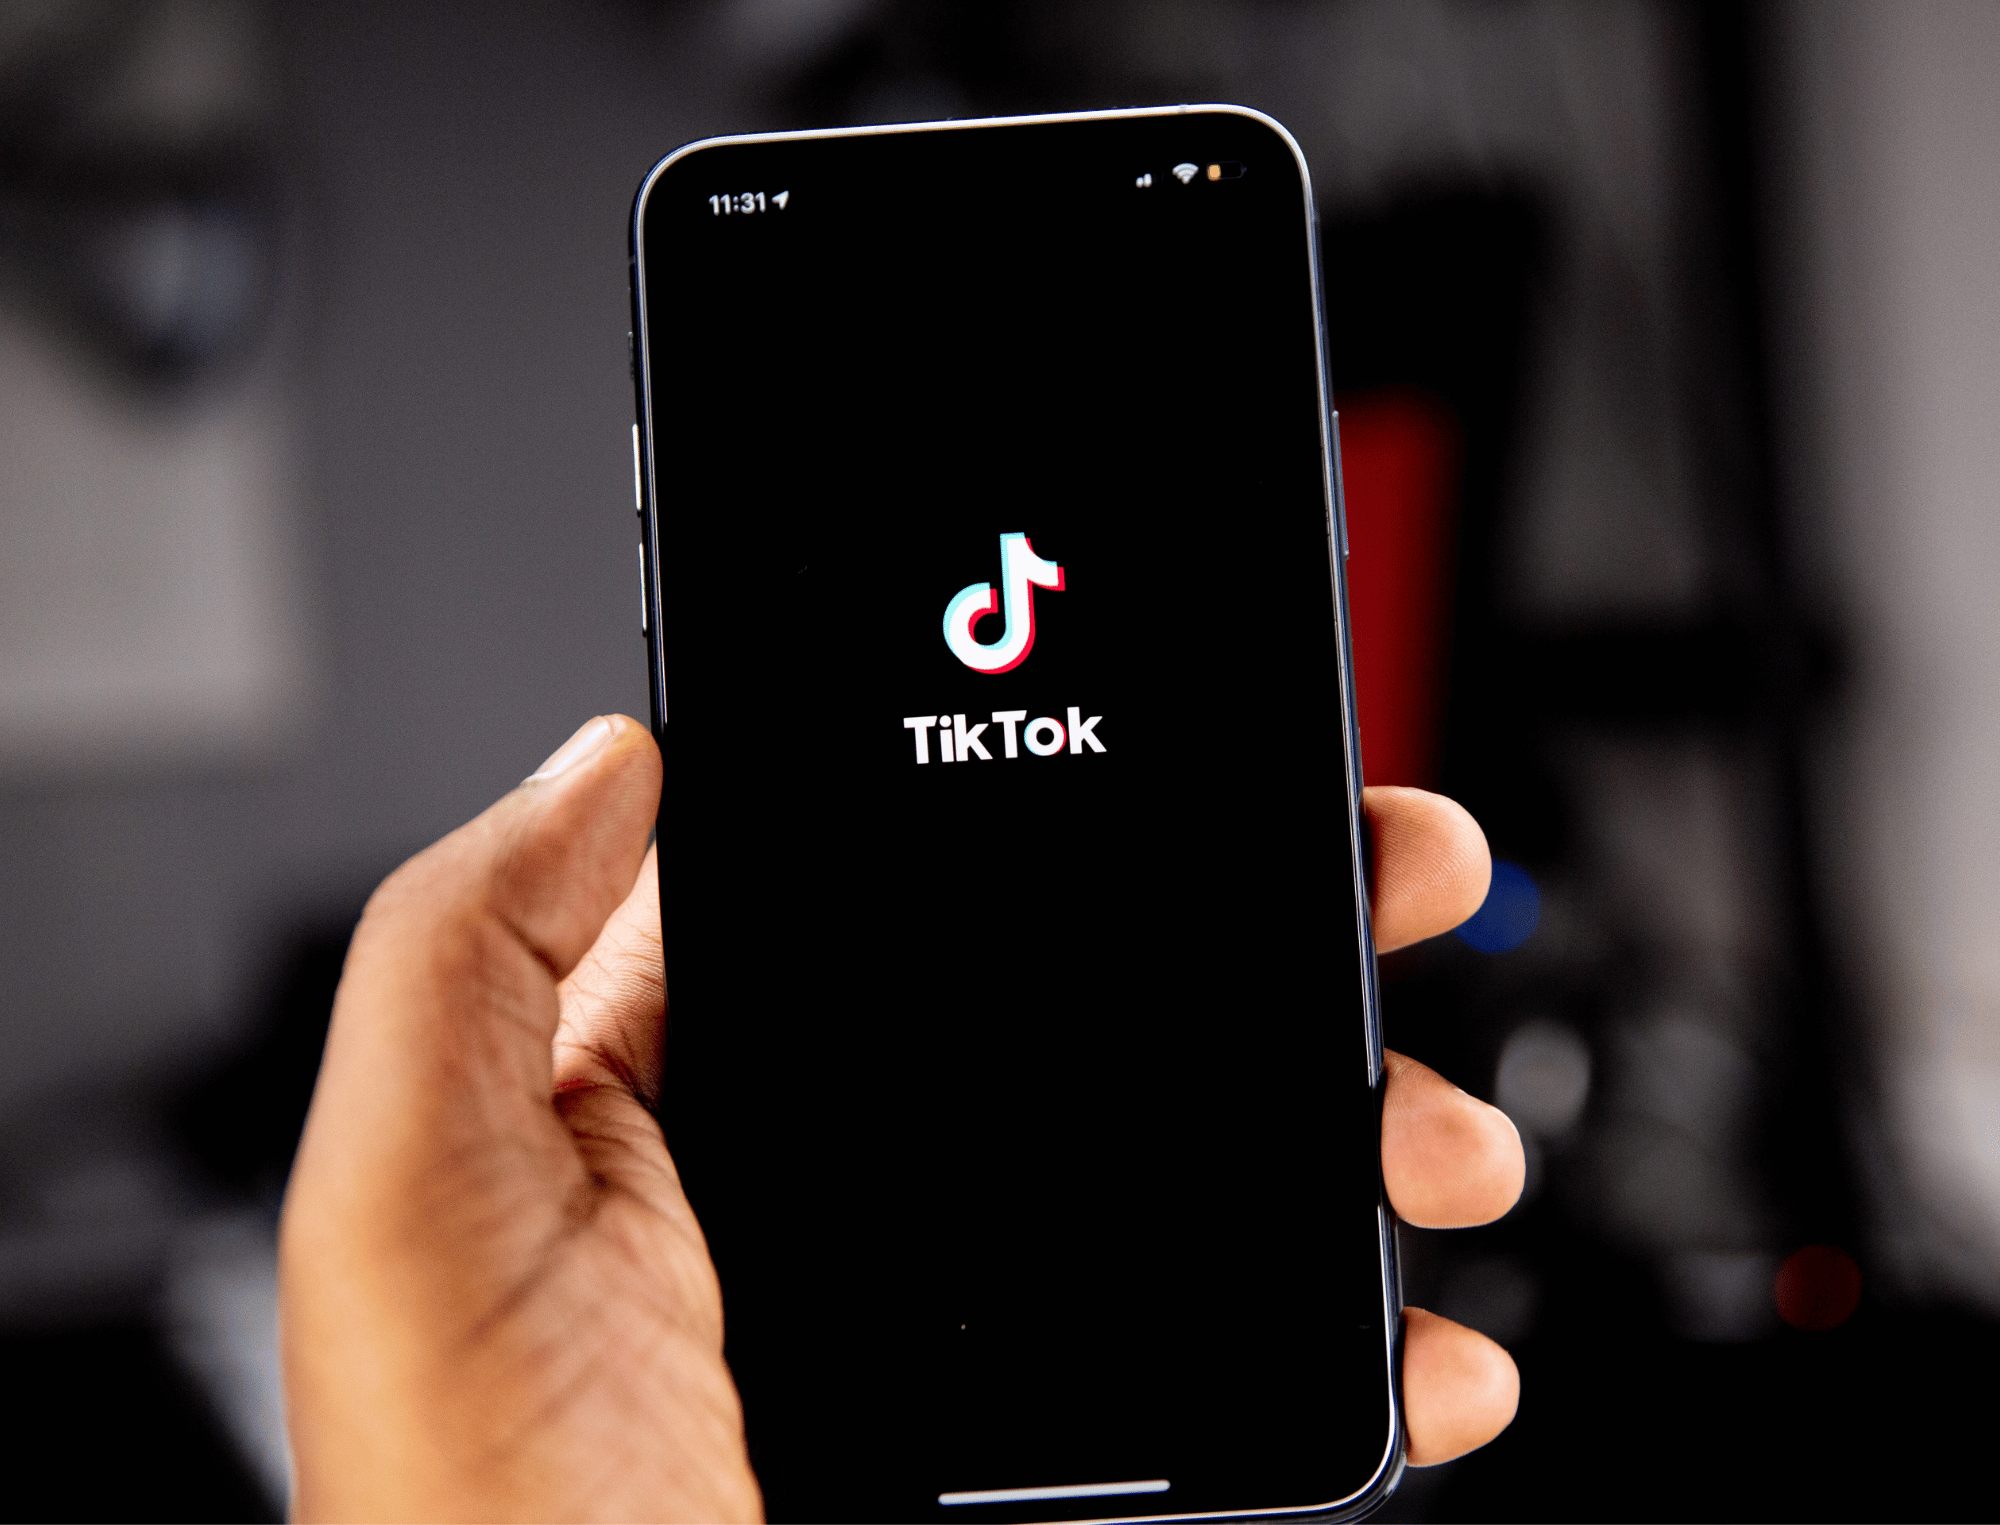 Person holding an iPhone with the TikTok app open. Discover 5 Gen Z activists with Britt Hawthorne. Photo: Solen Feyissa.